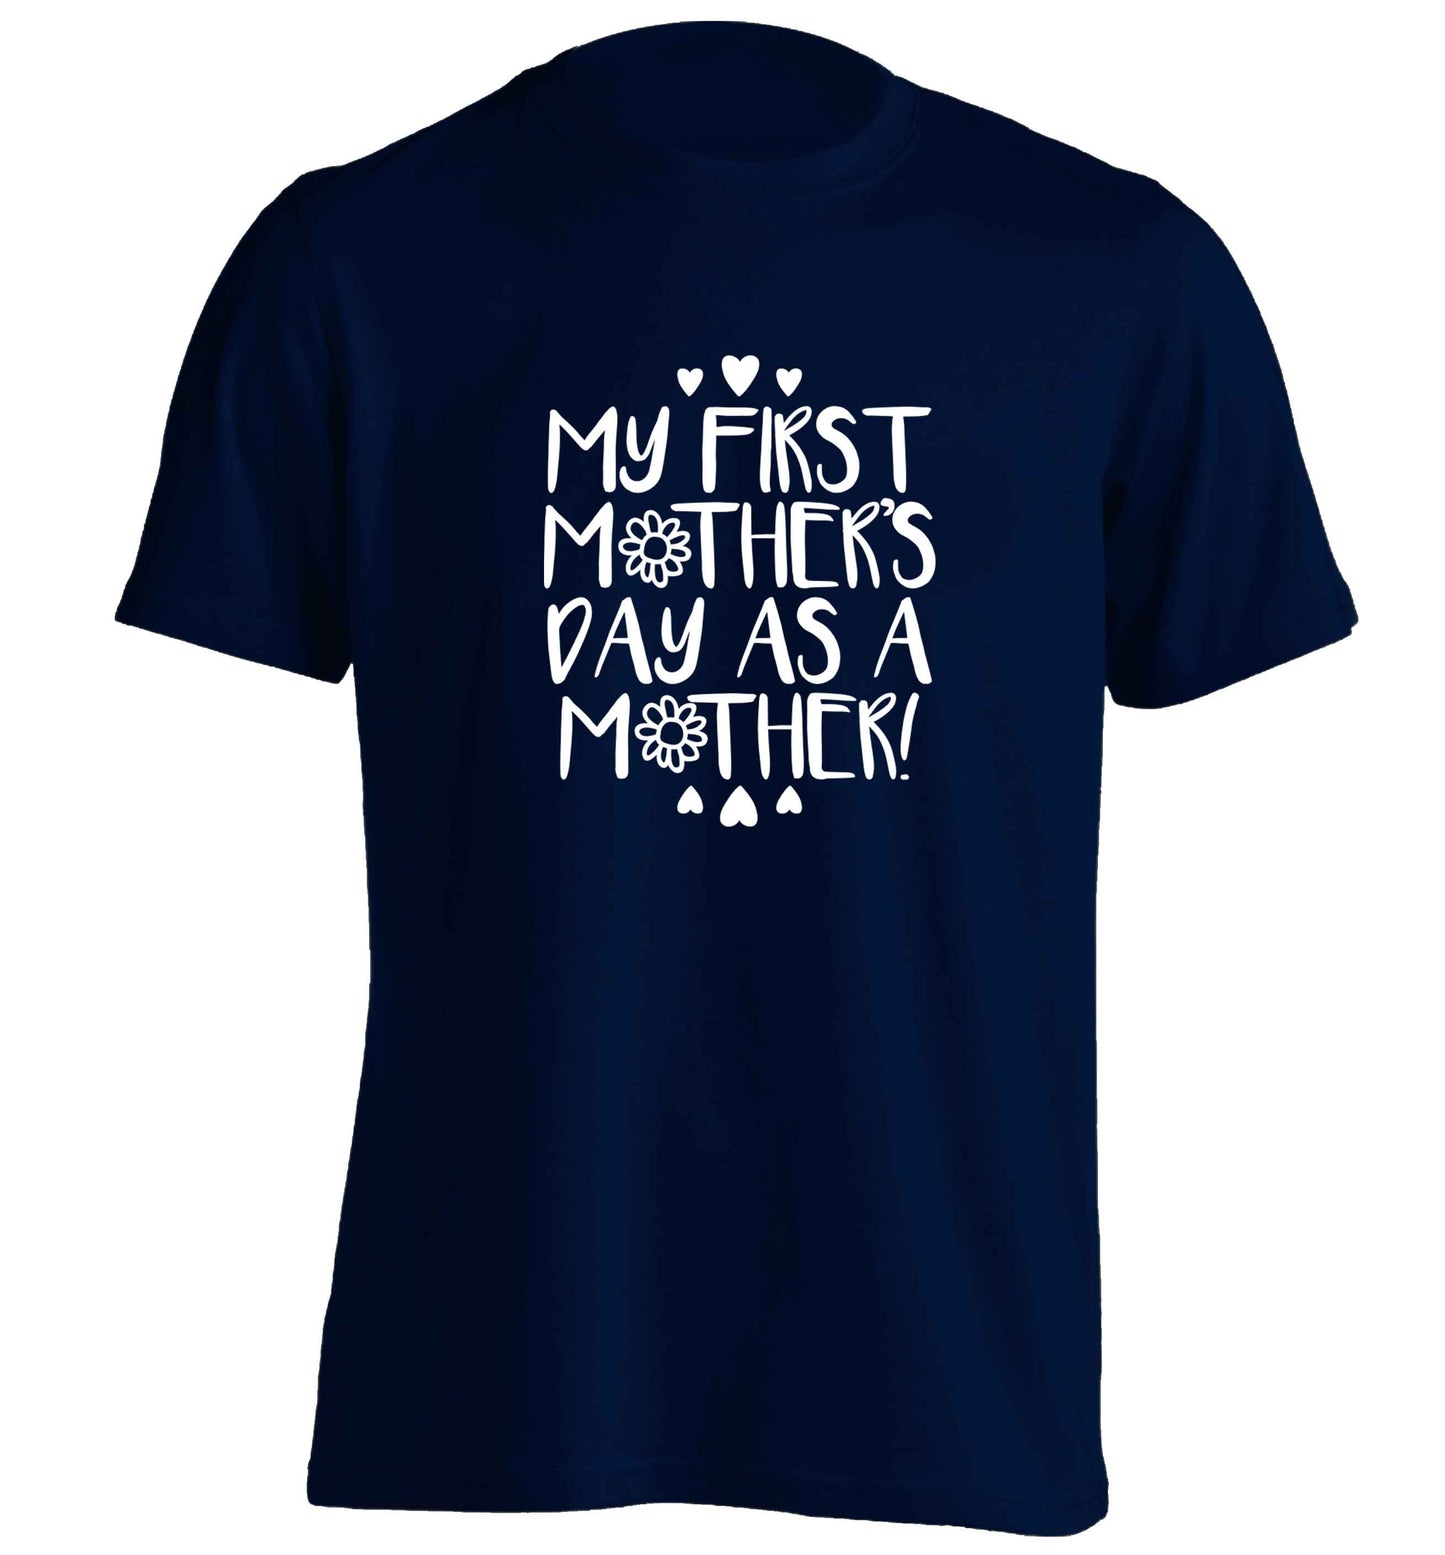 It's my first mother's day as a mother adults unisex navy Tshirt 2XL